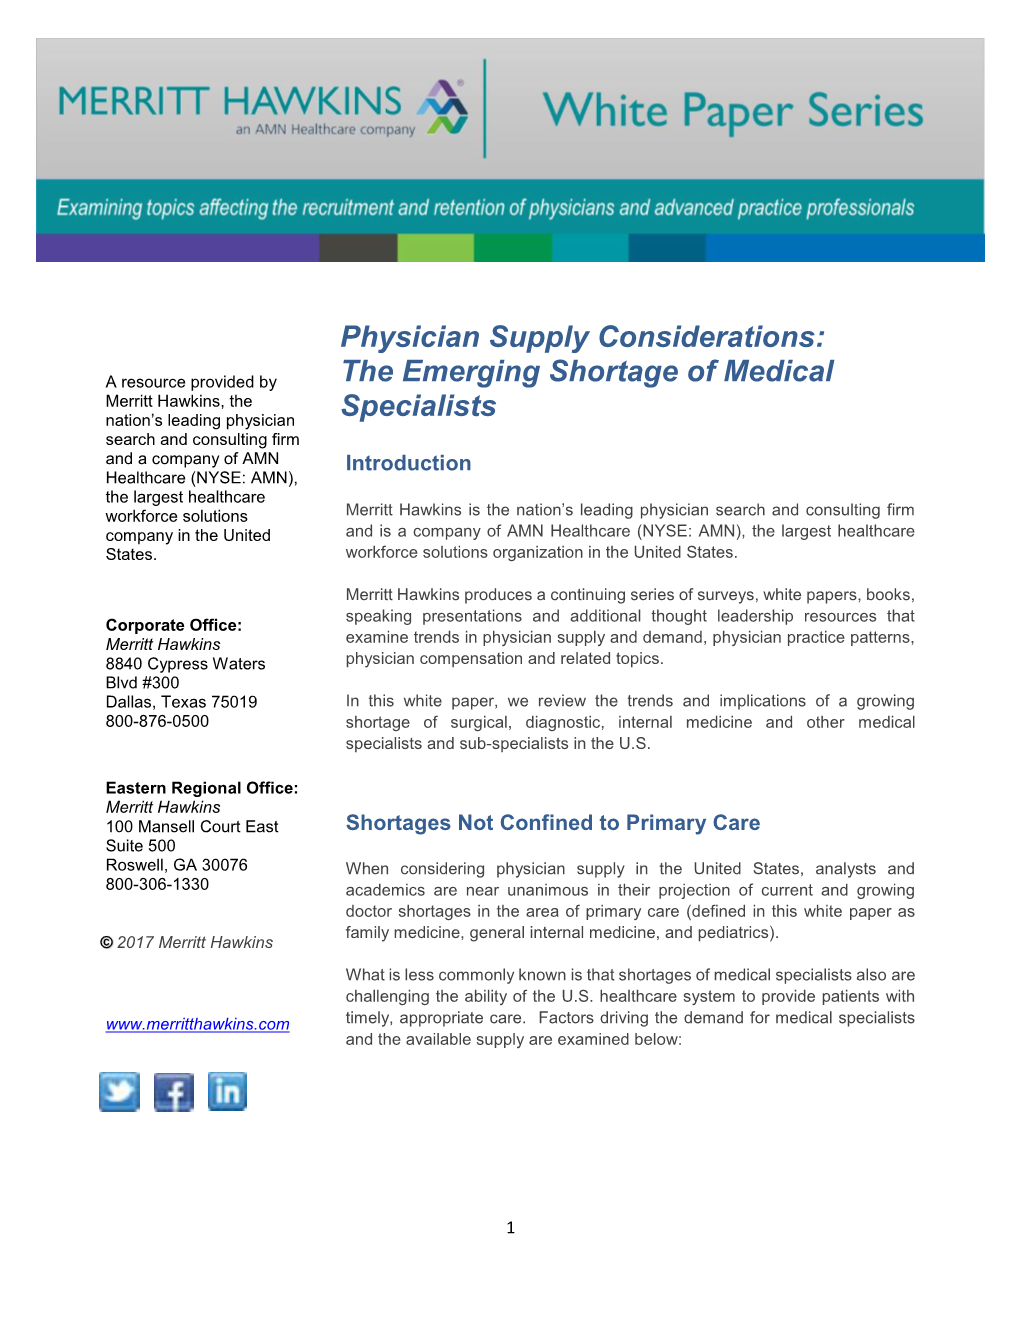 Physician Supply Considerations: the Emerging Shortage of Medical Specialists